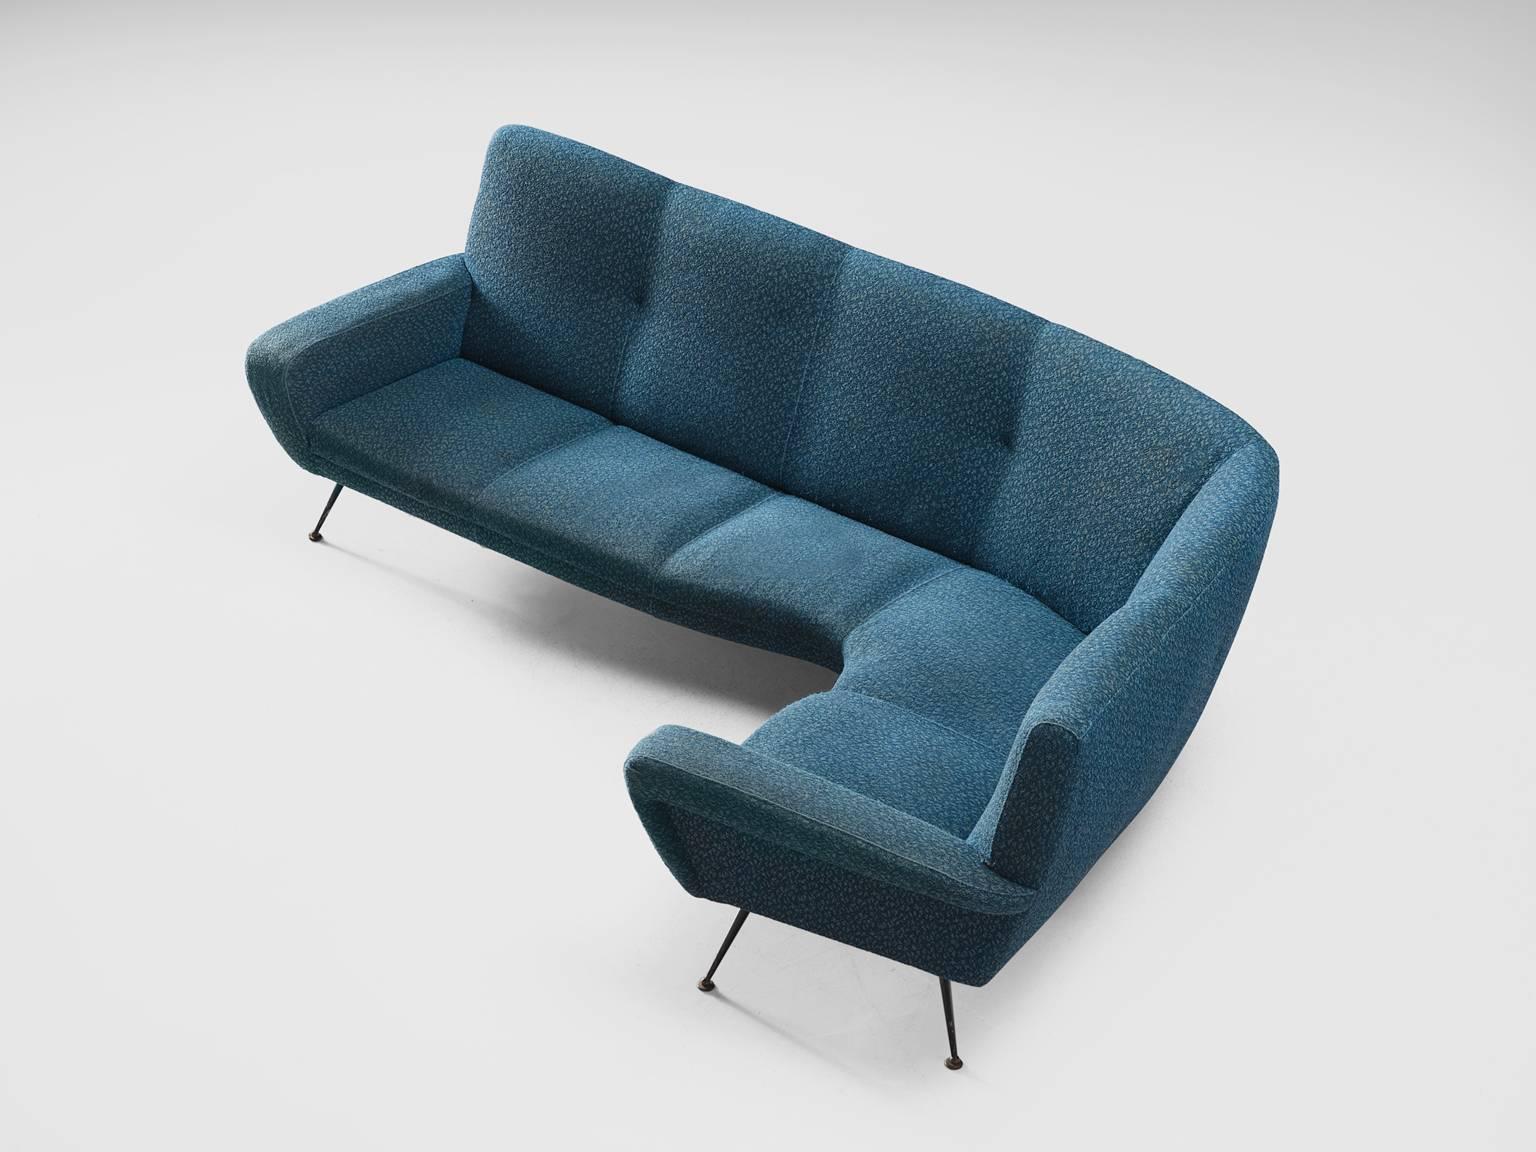 ISA sofa, blue fabric (re-upholstery needed) and brass, Italy, 1950s

This dynamic sofa features a high back and extremely slender and delicate legs. The six tapered delicate legs give this sofa a clear and unobstructed base. This theatrical sofa is